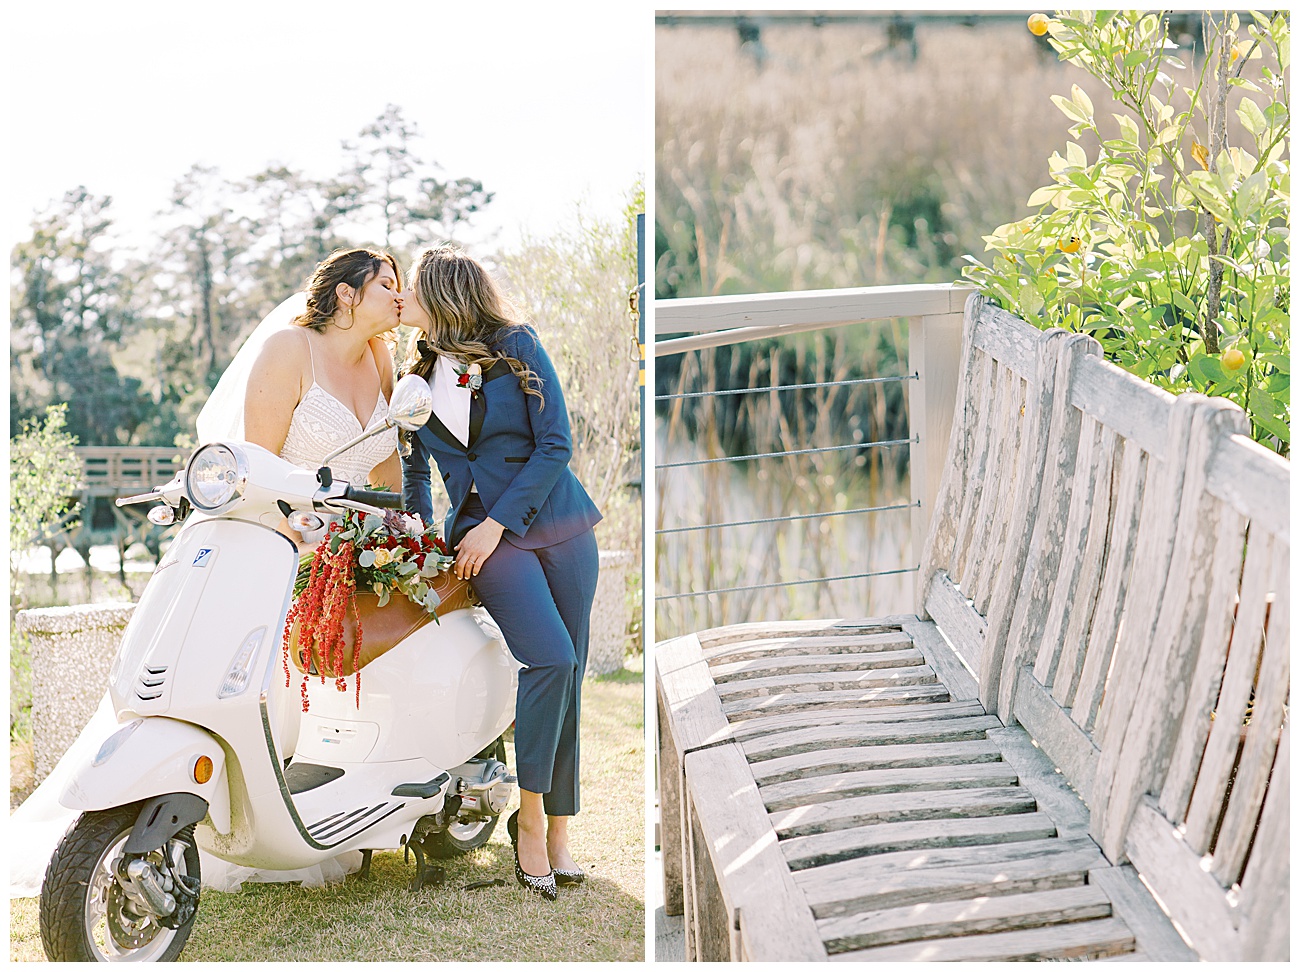 Luxurious lesbian couple portrait with a European vespa moped and rustic chic outdoor seating for the ceremony in Savannah!